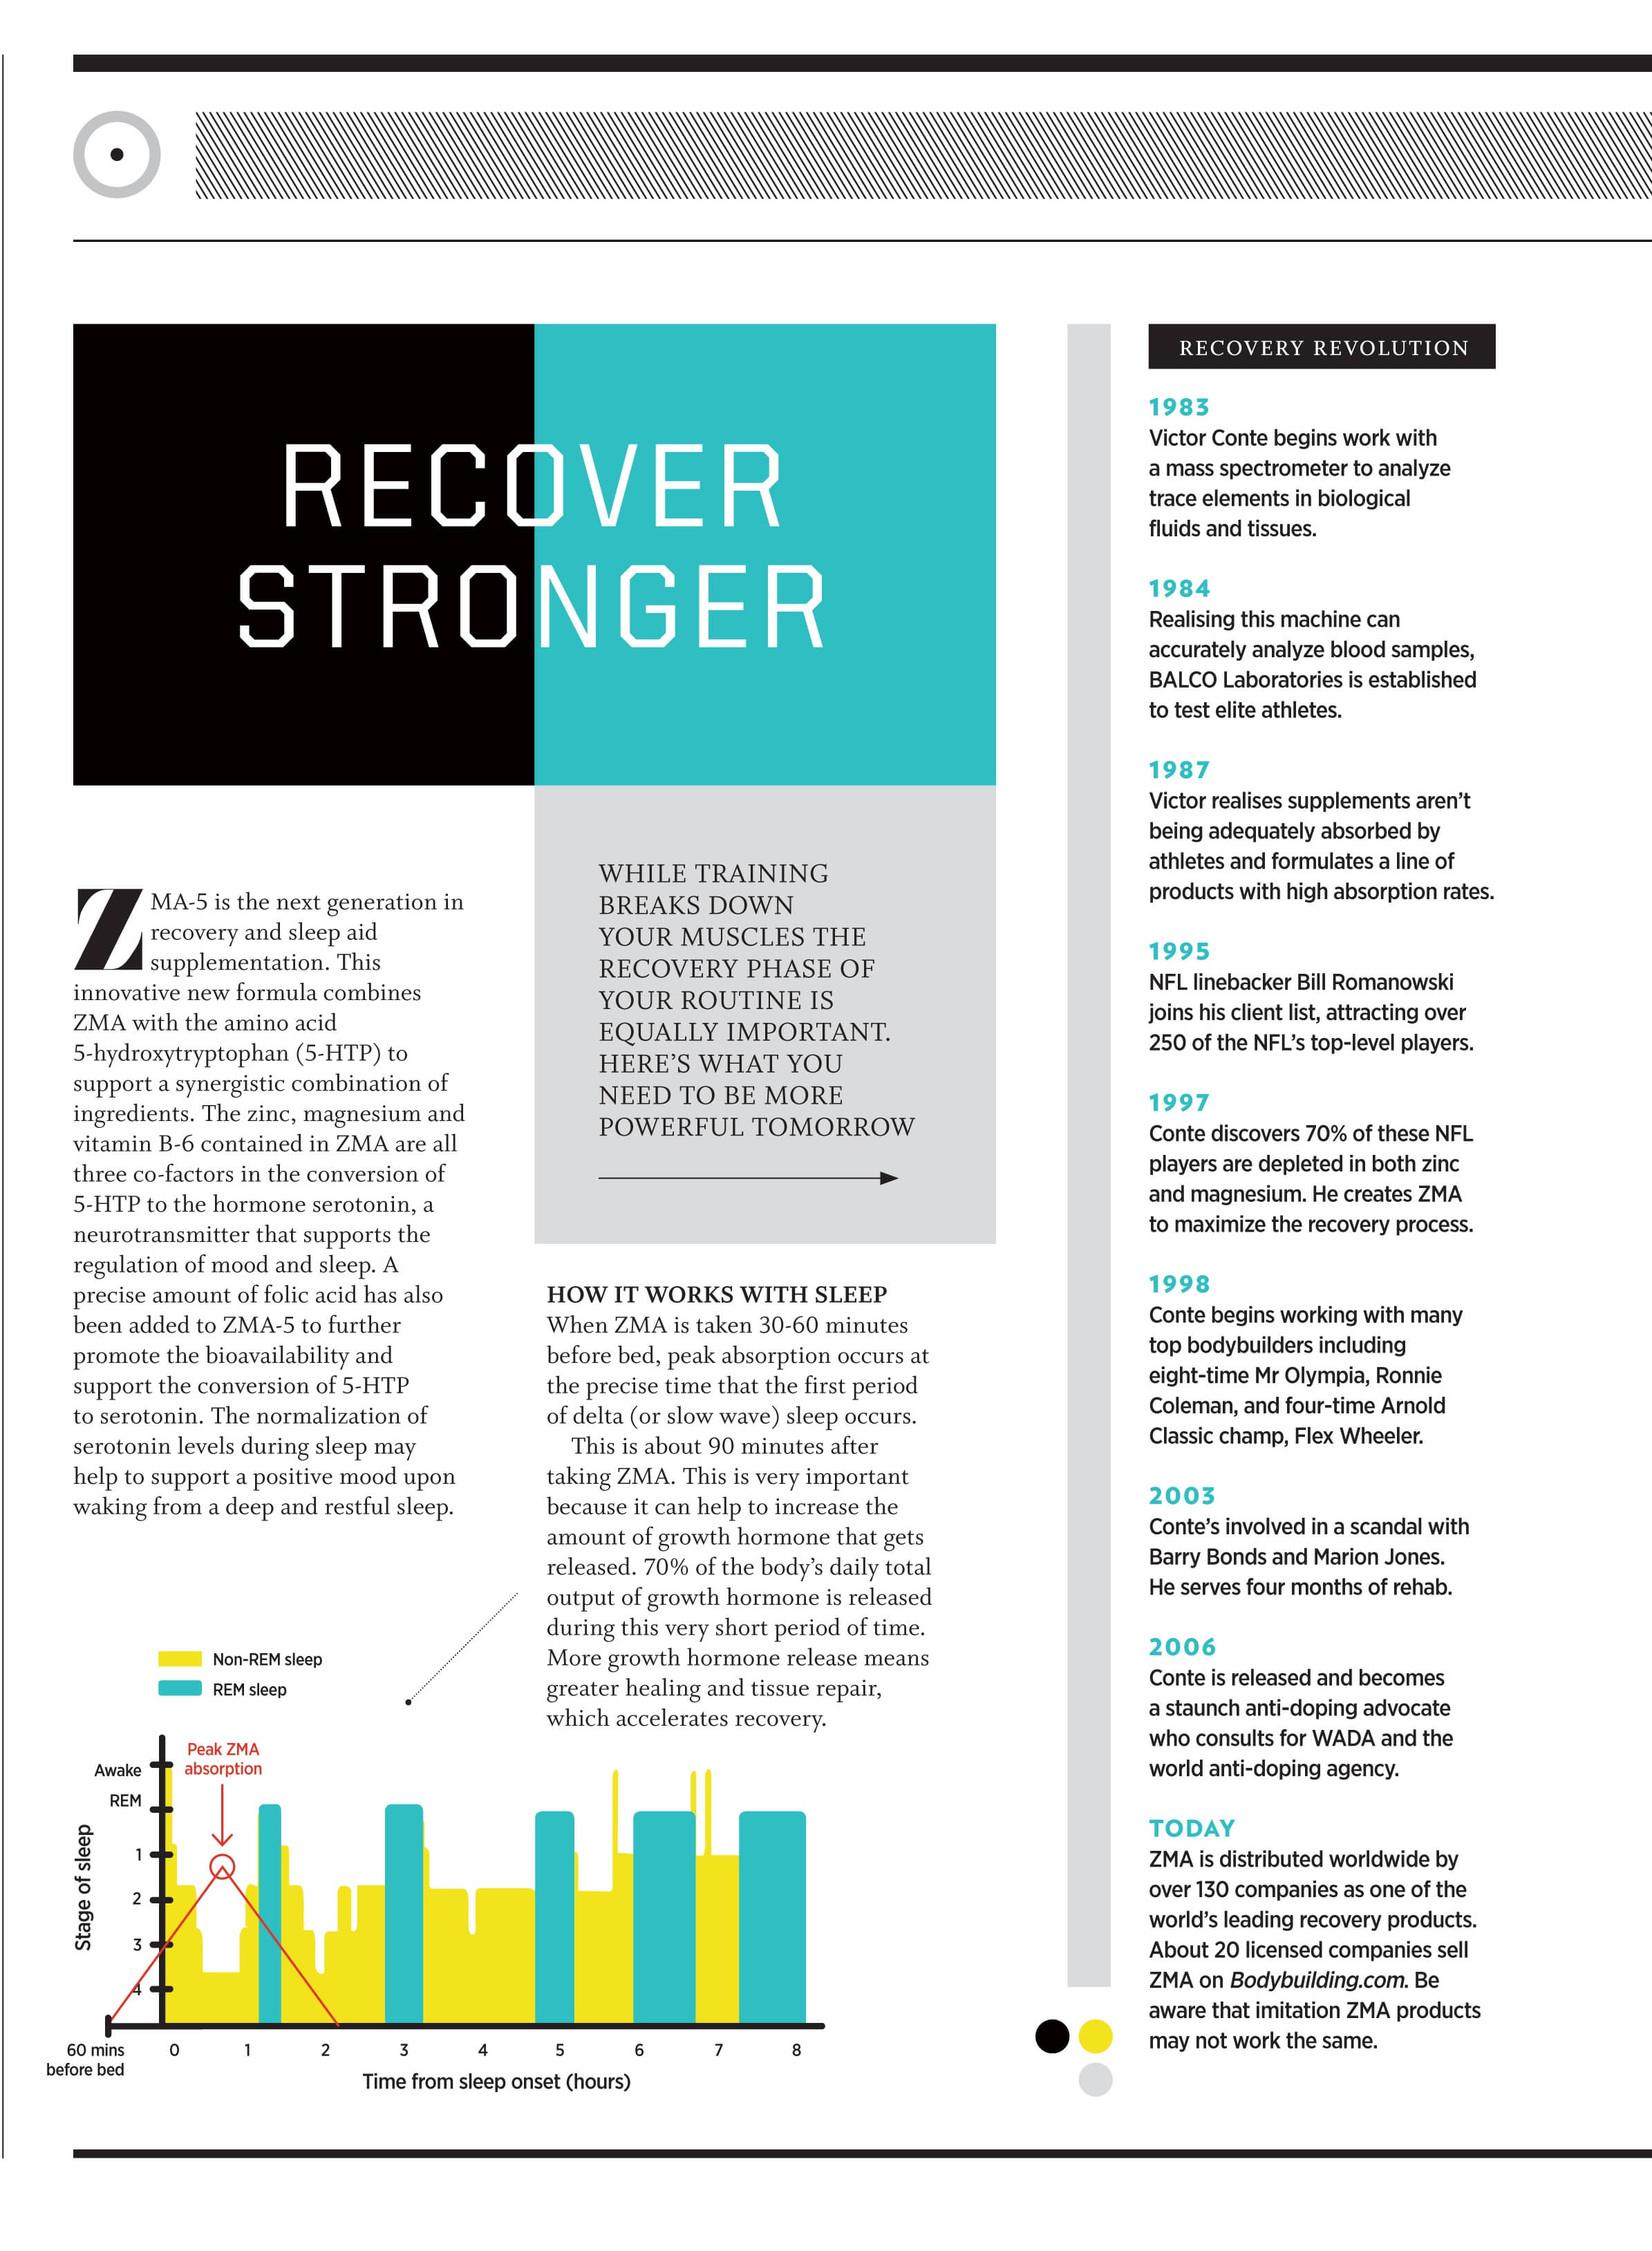 SNAC Train Article: Recover Stronger